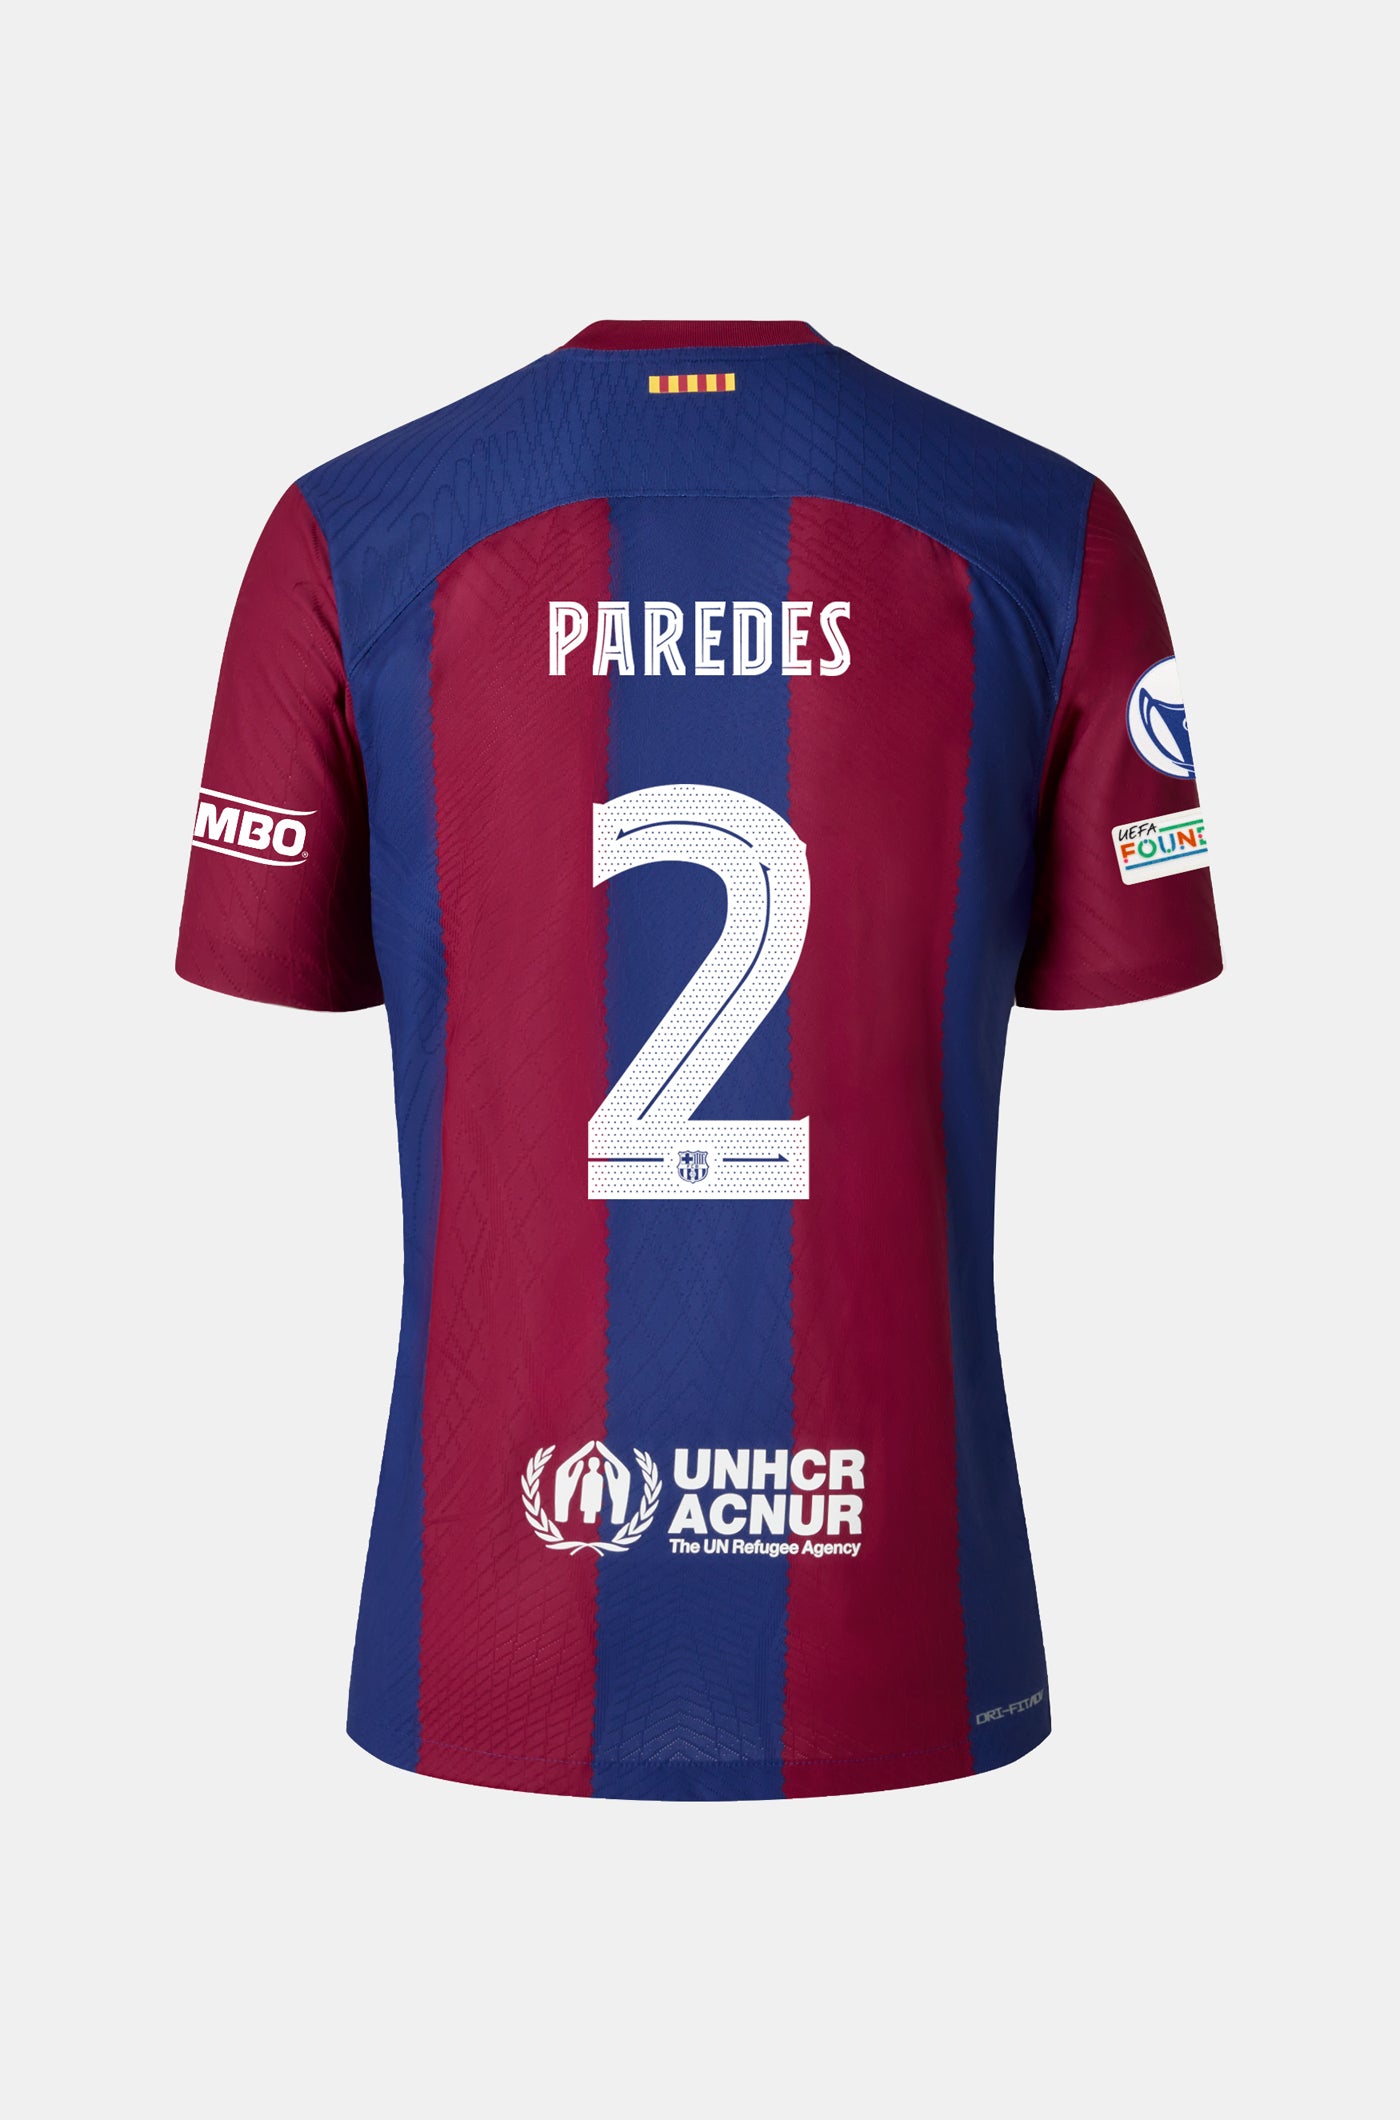 UWCL FC Barcelona Home Shirt 23/24 Player's Edition - Women - PAREDES